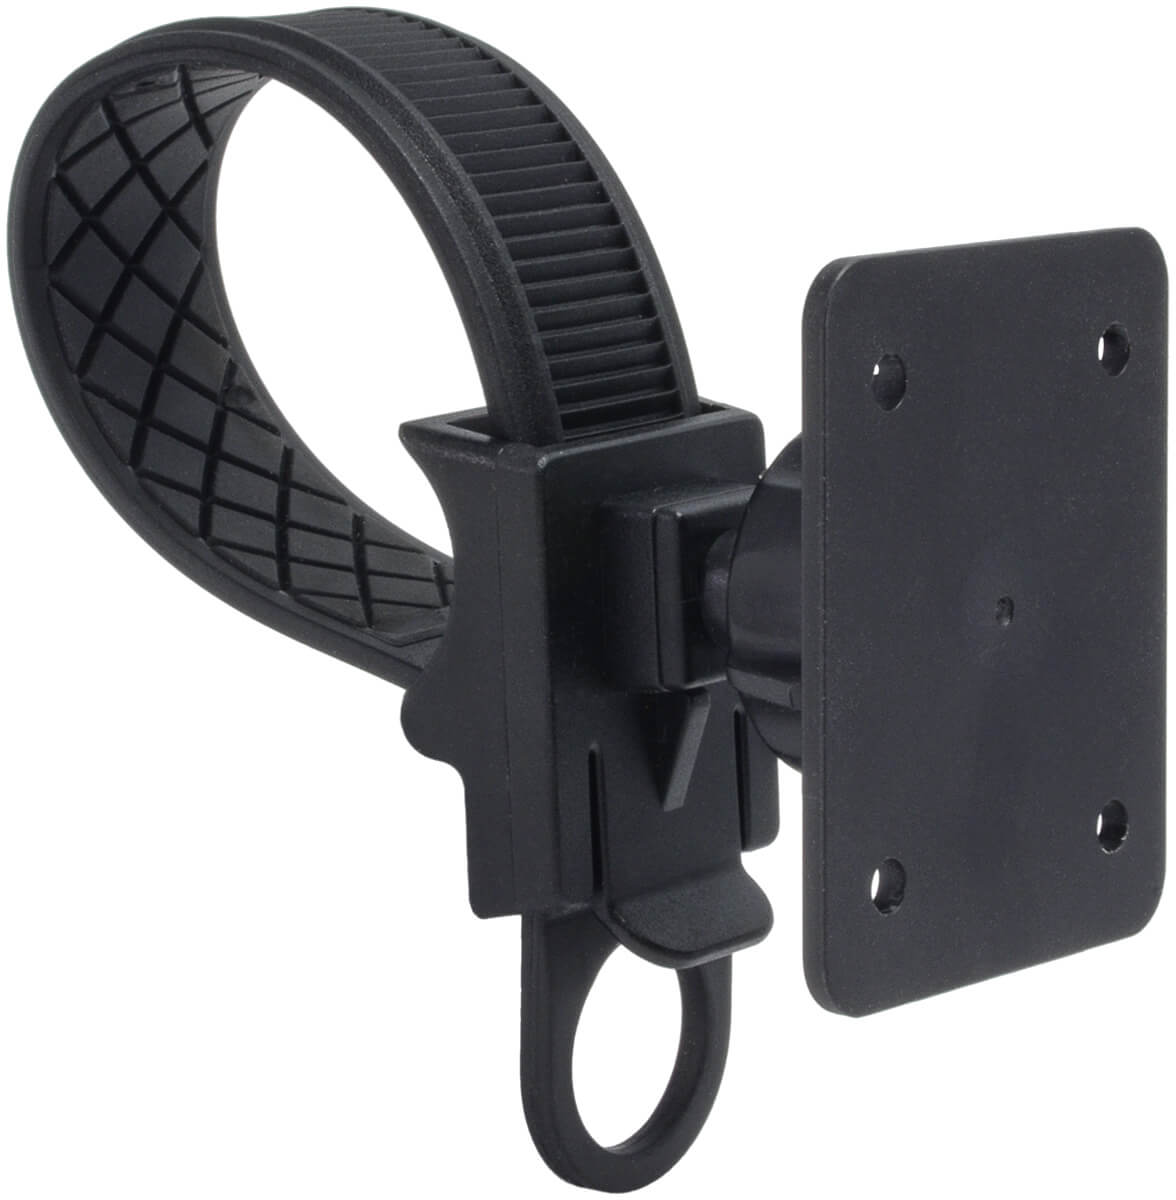 Strap mount with AMPS plate